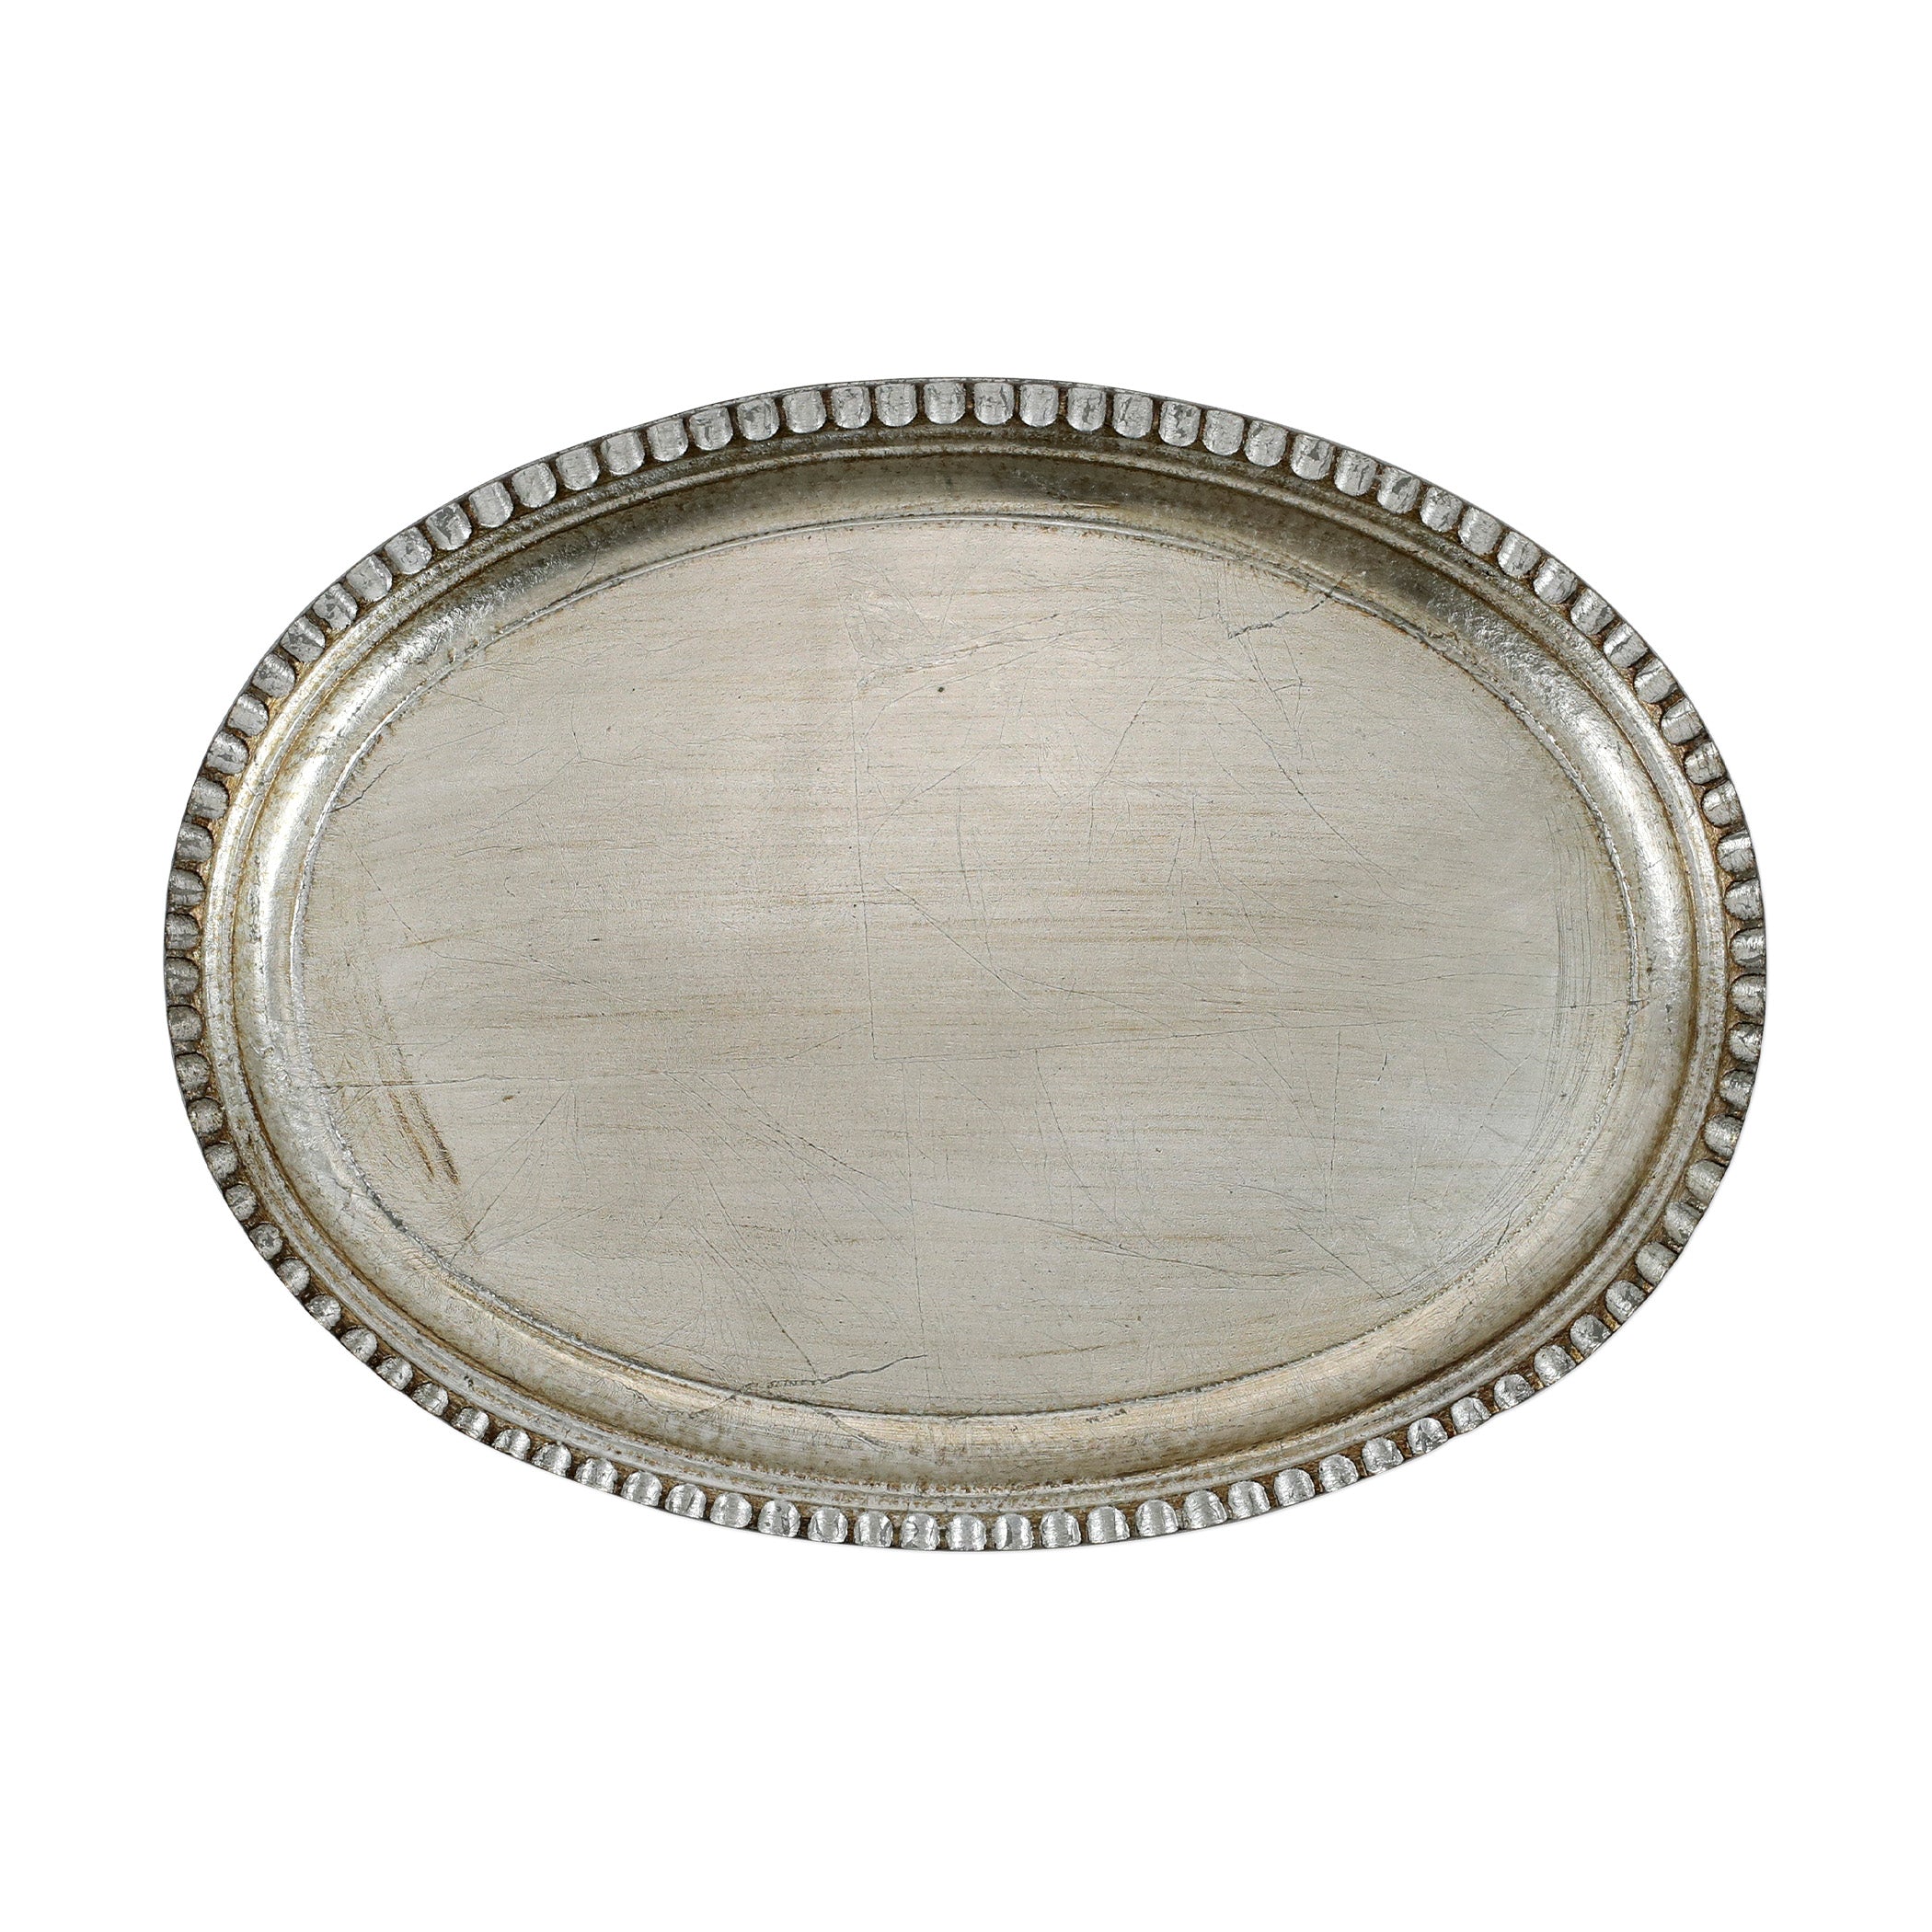 Florentine Wooden Accessories Platinum Small Oval Tray